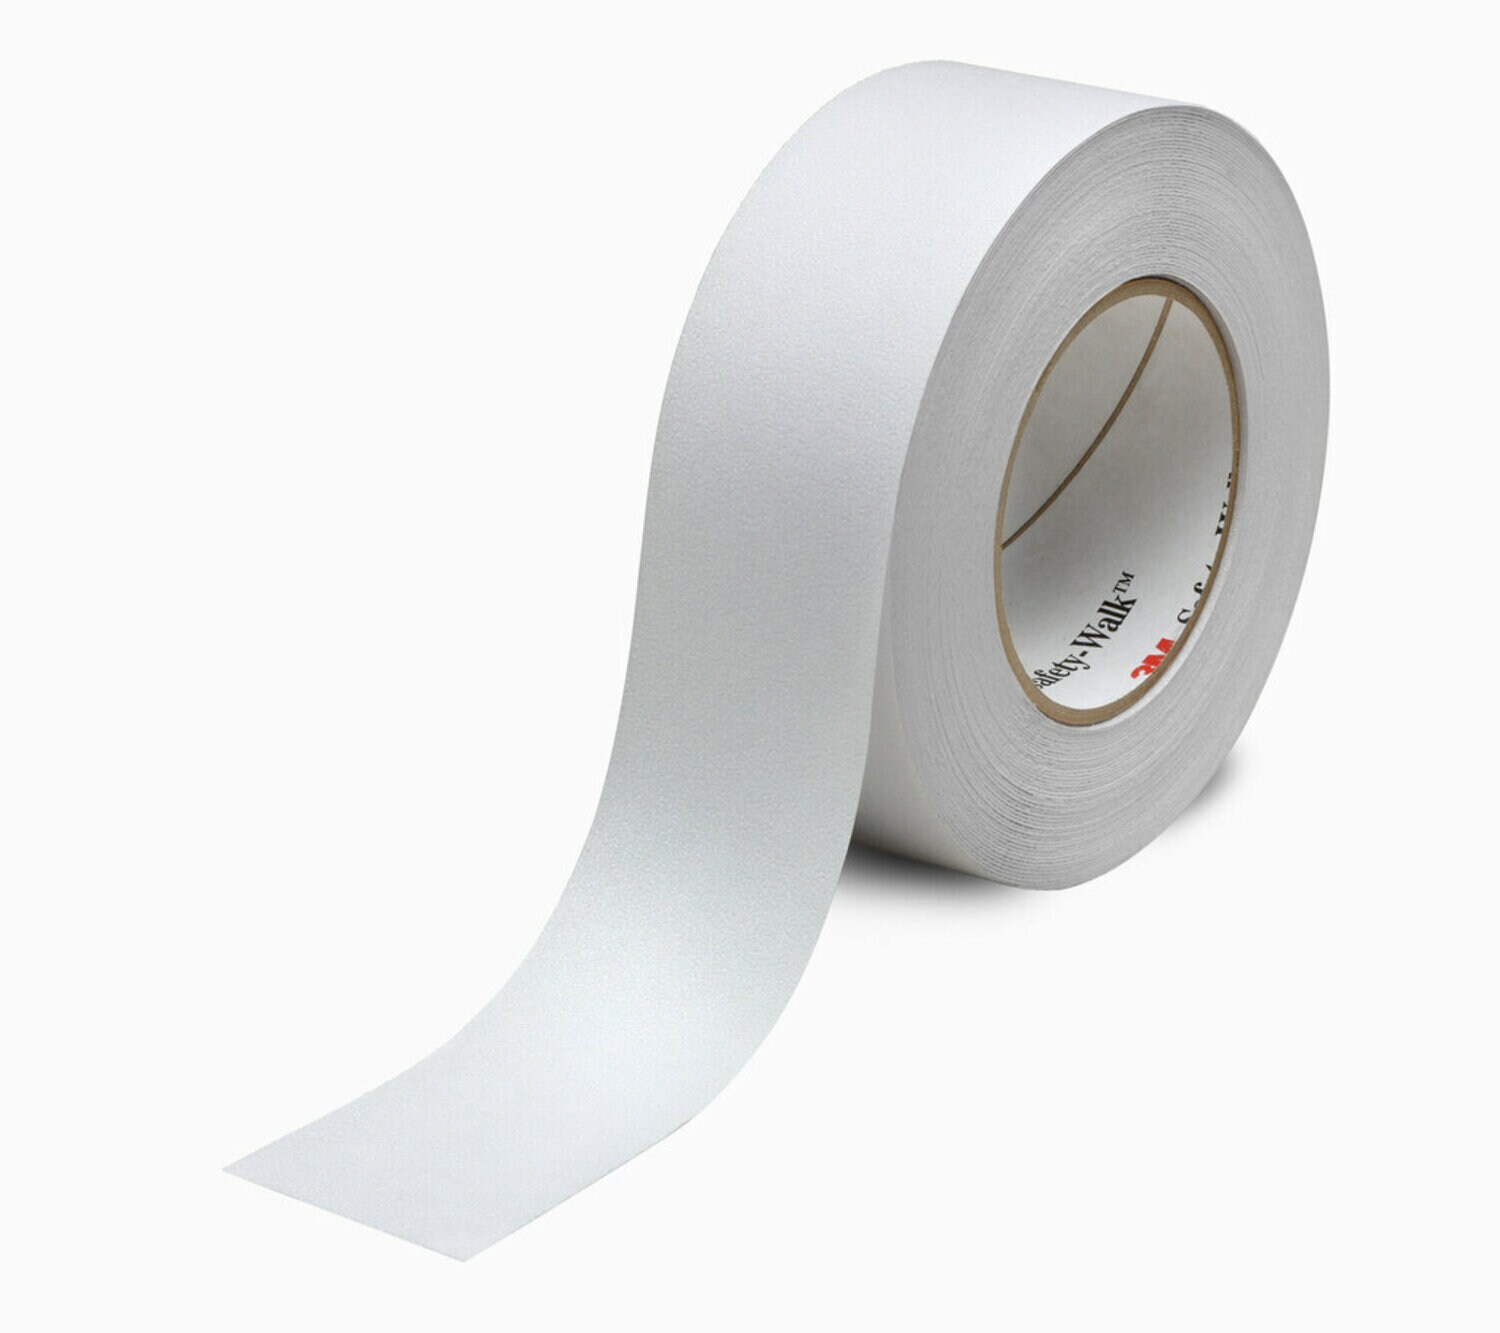 7100139049 - 3M Safety-Walk Slip-Resistant Fine Resilient Tapes & Treads 220,
Clear, 1 in x 60 ft, Roll, 4/Case